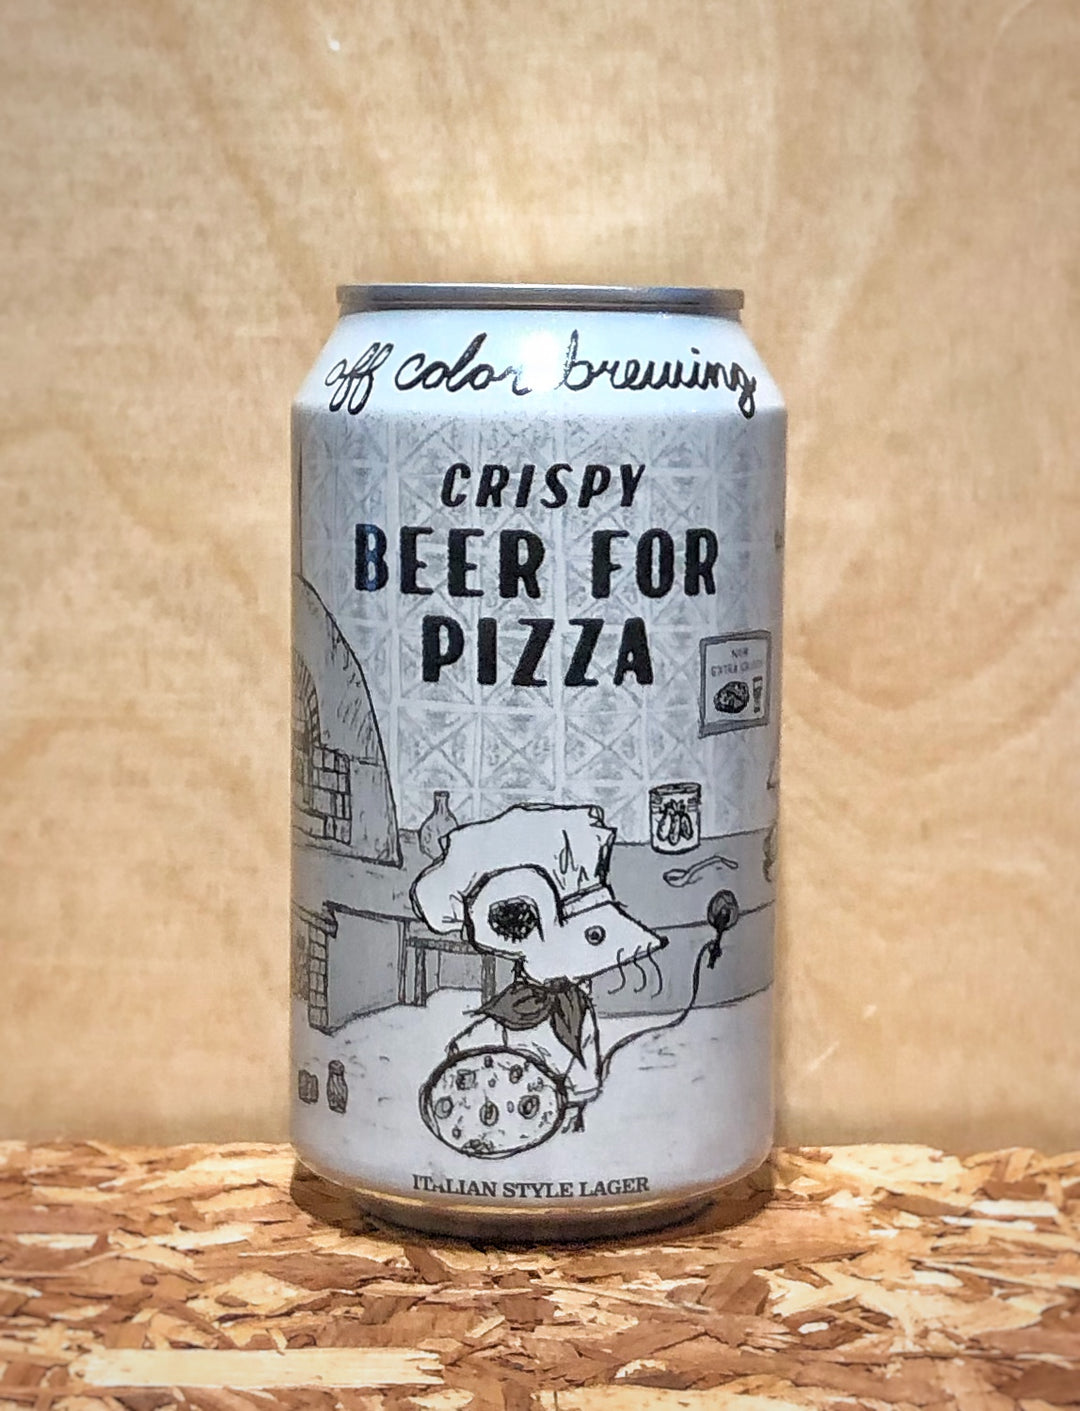 Off Color Brewing 'Crispy Beer for Pizza' Italian Style Lager (Chicago, IL)